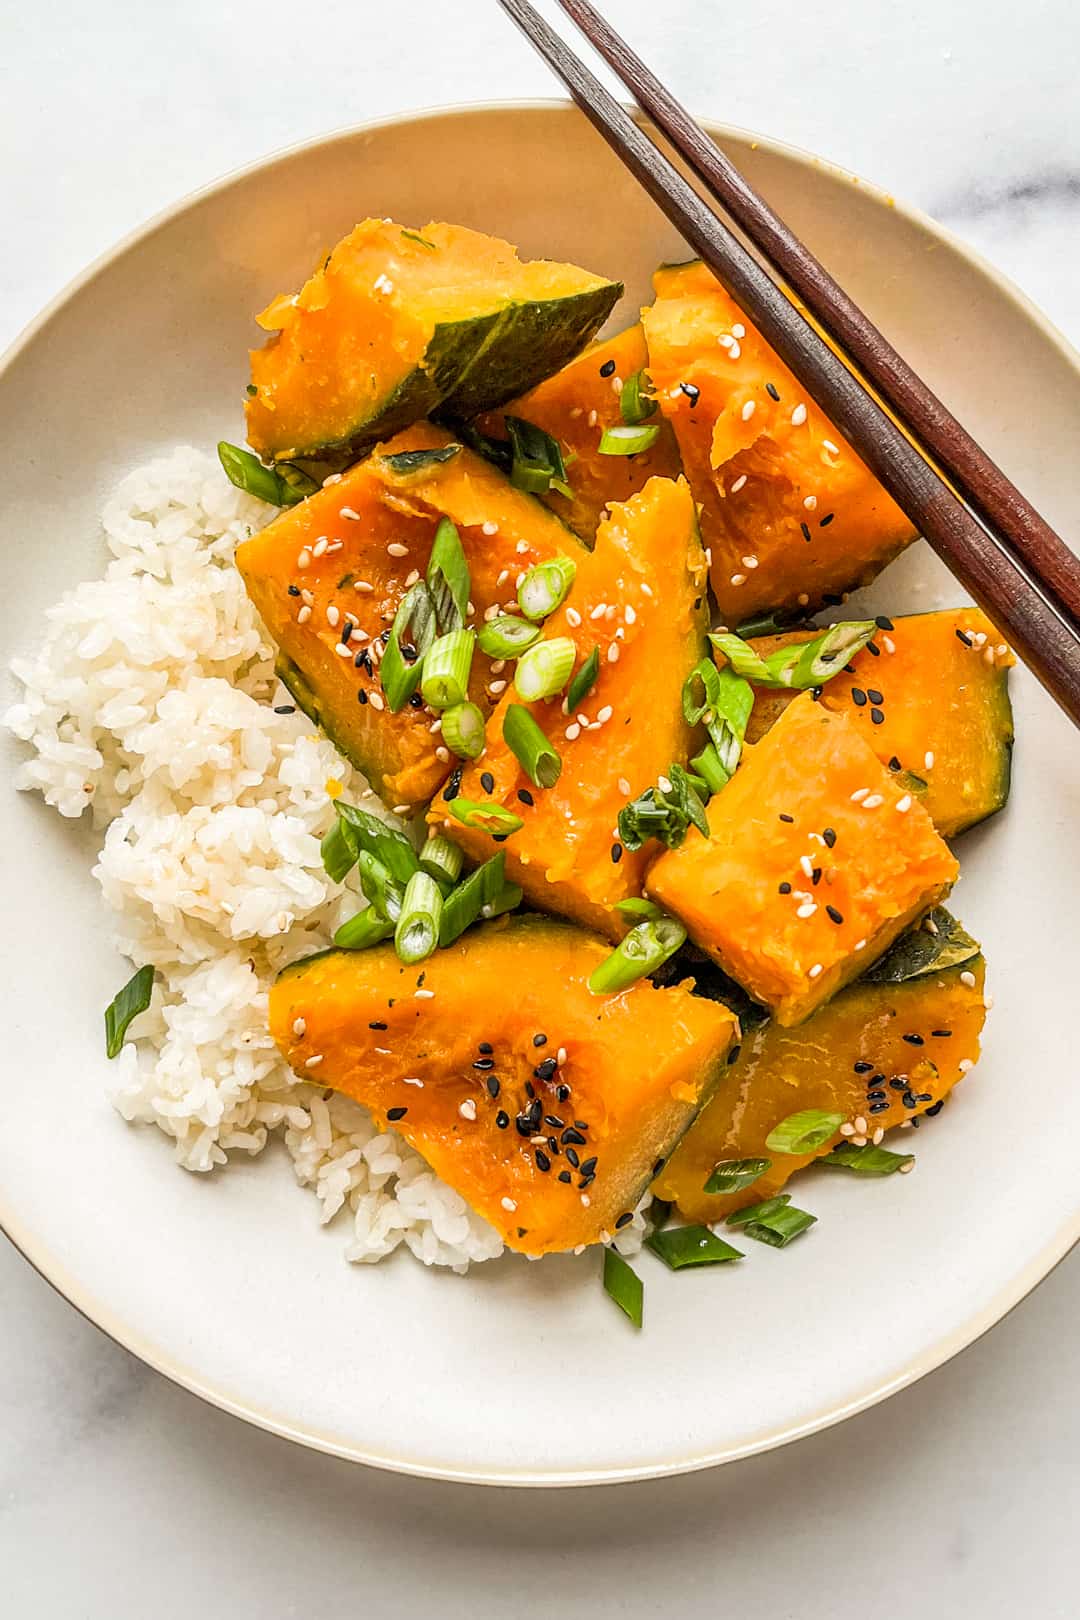 Kabocha squash pieces with rice in a bowl.